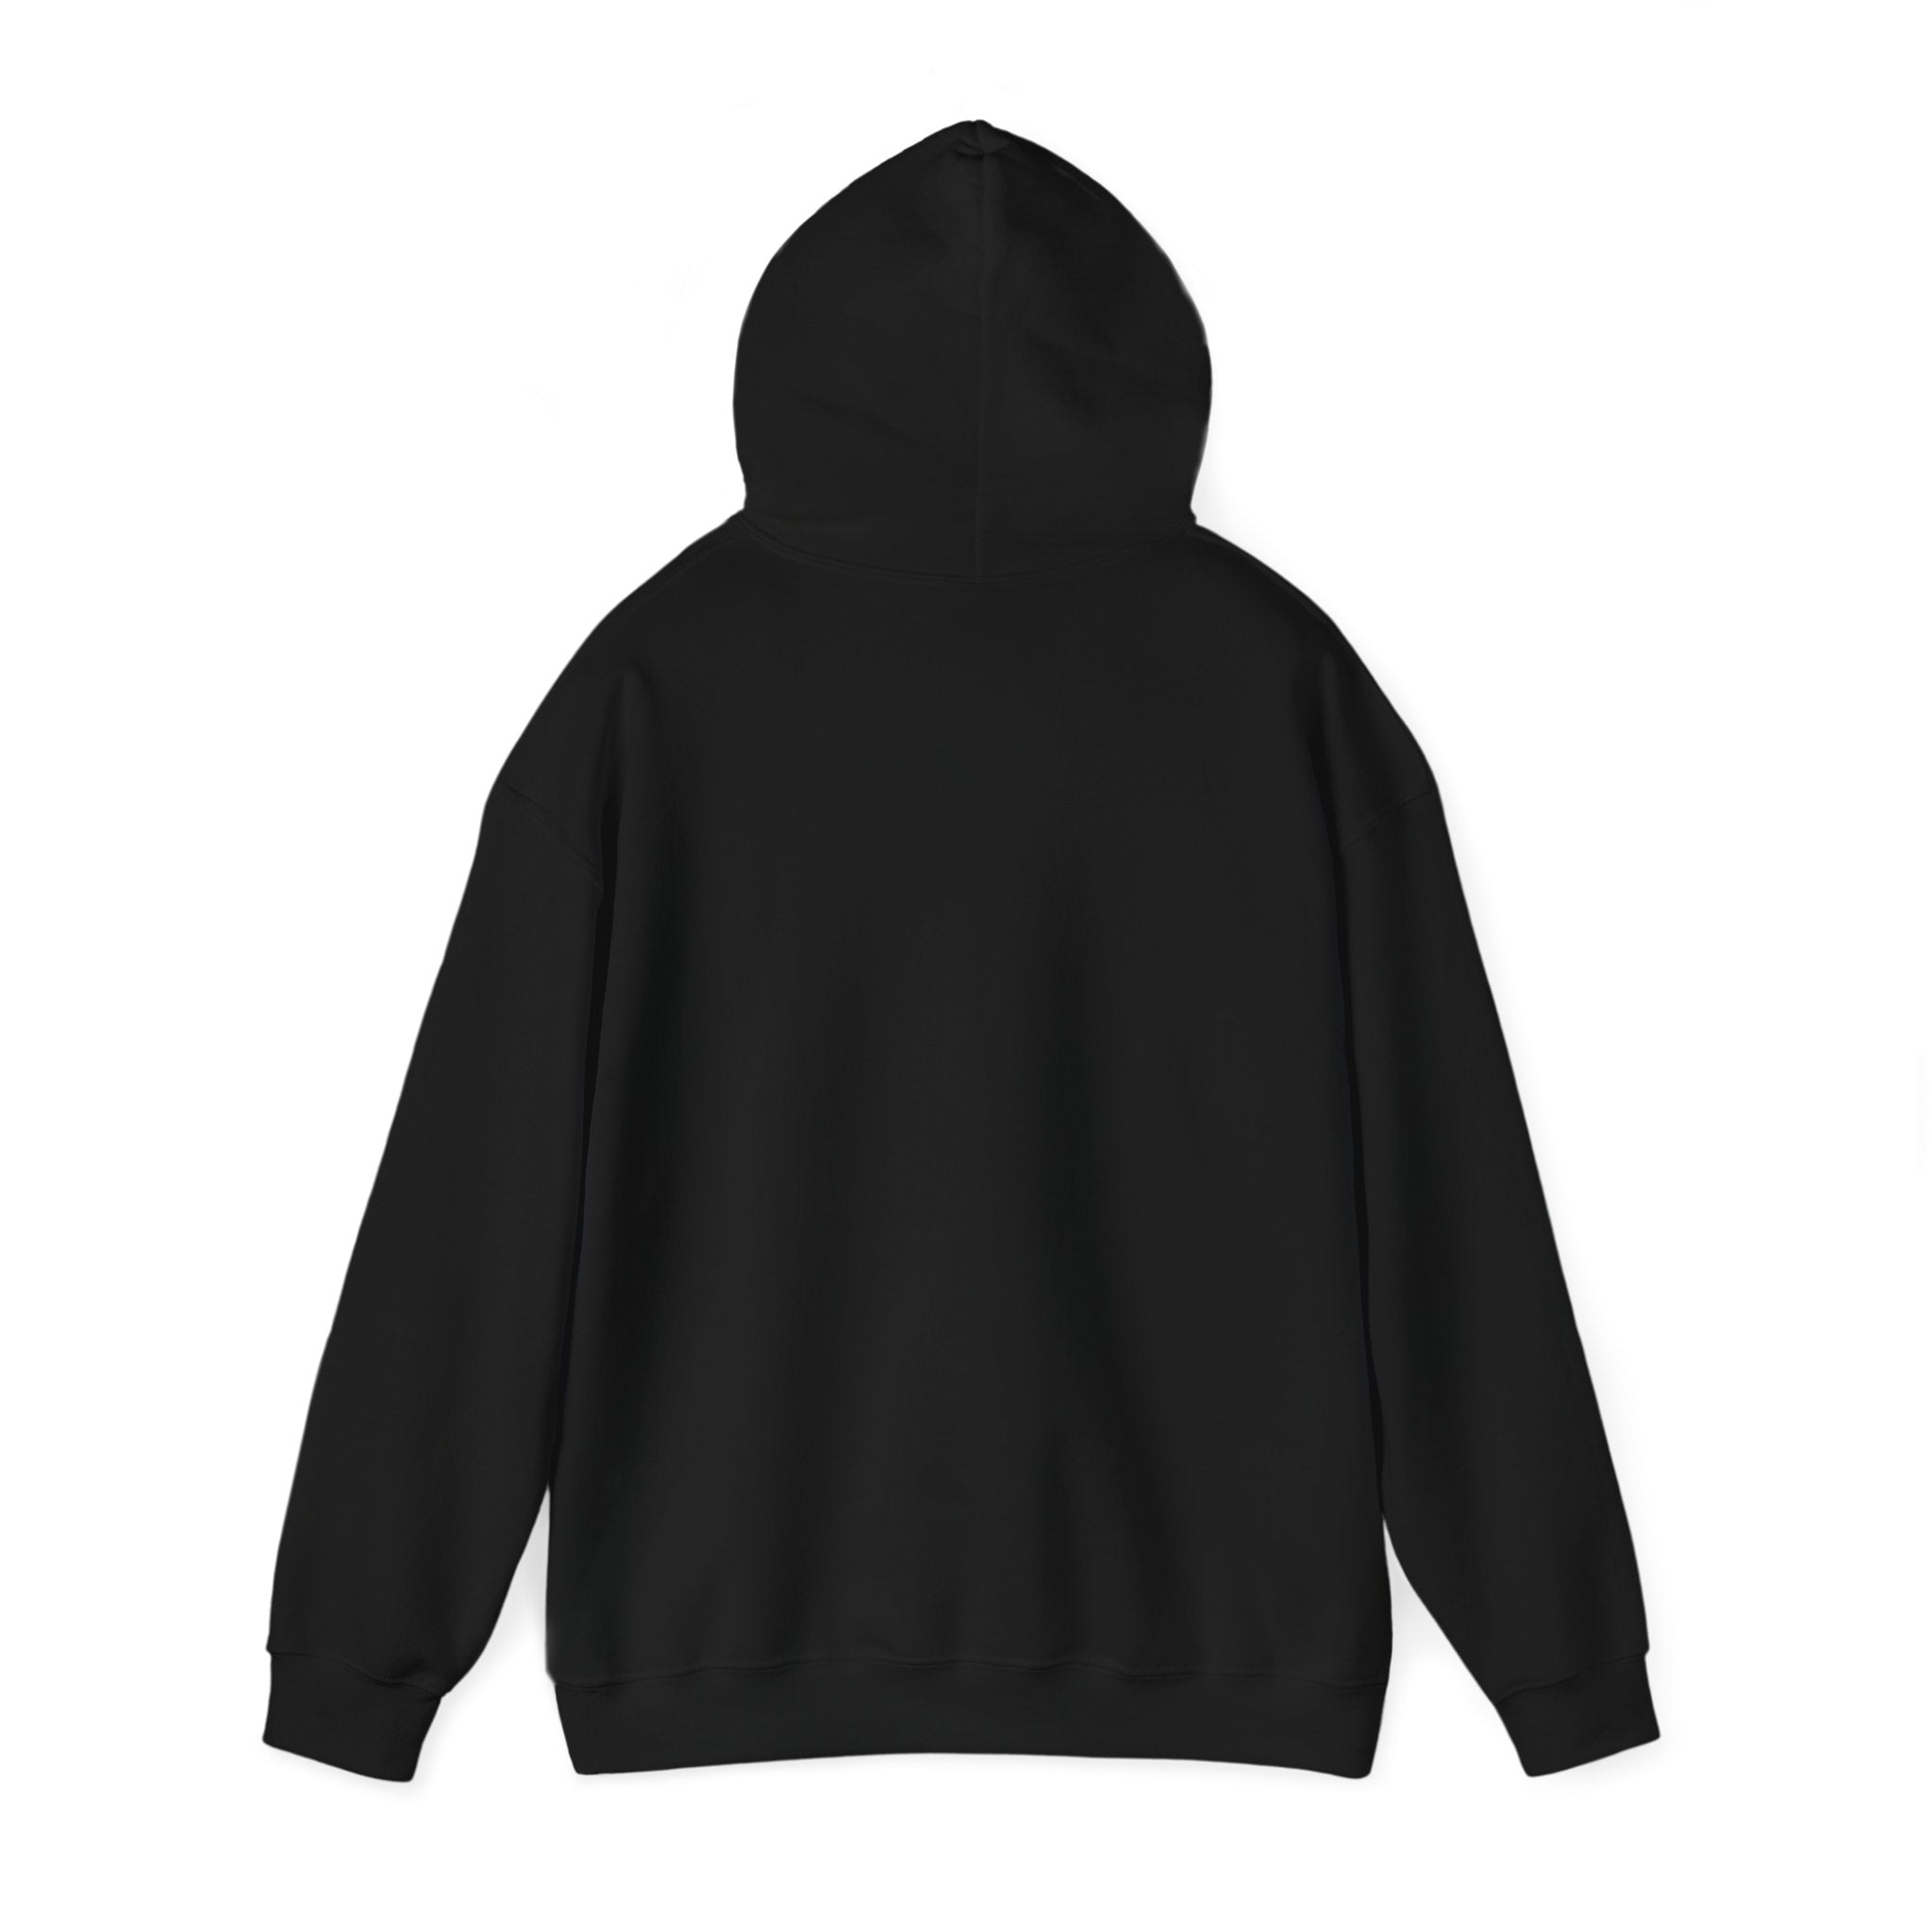 Back view of a plain black hooded sweatshirt with long sleeves and a hood, displayed against a white background. This sleek piece of fashion embodies the understated elegance of the "Wings of Victory - Hooded Sweatshirt" collection.